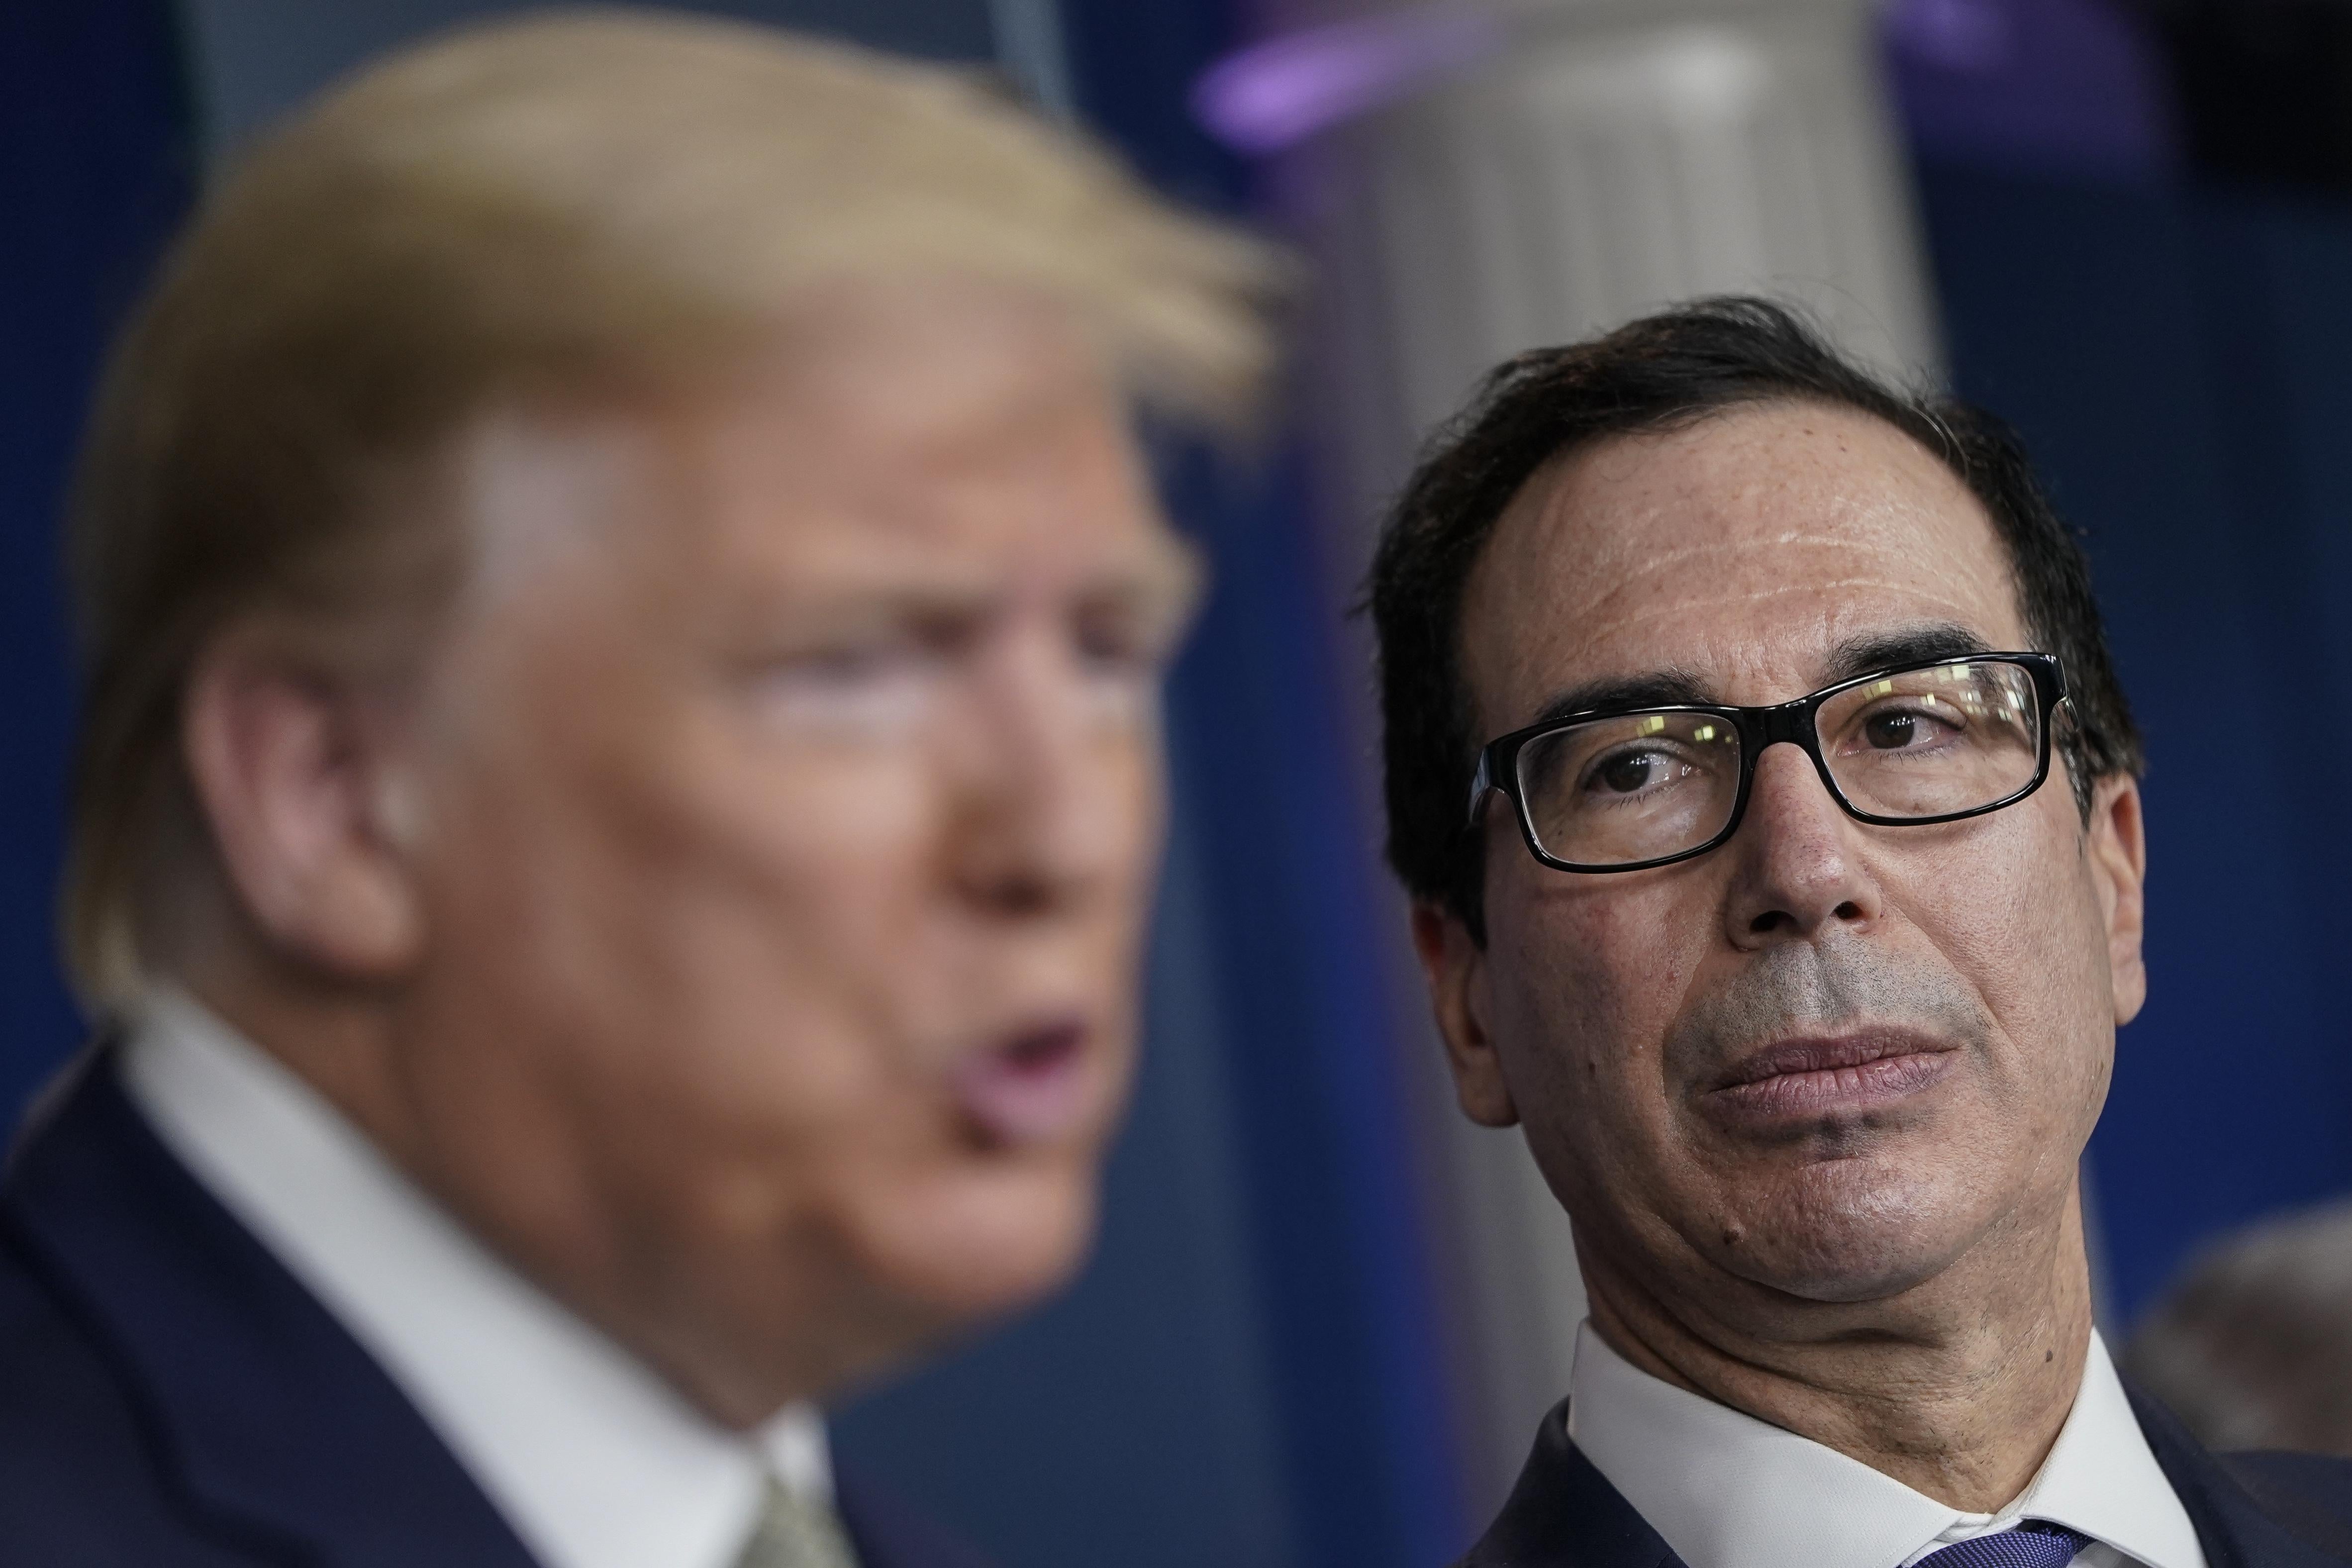 Steven Mnuchin, in focus, looks on as President Donald Trump speaks at the White House on Tuesday.